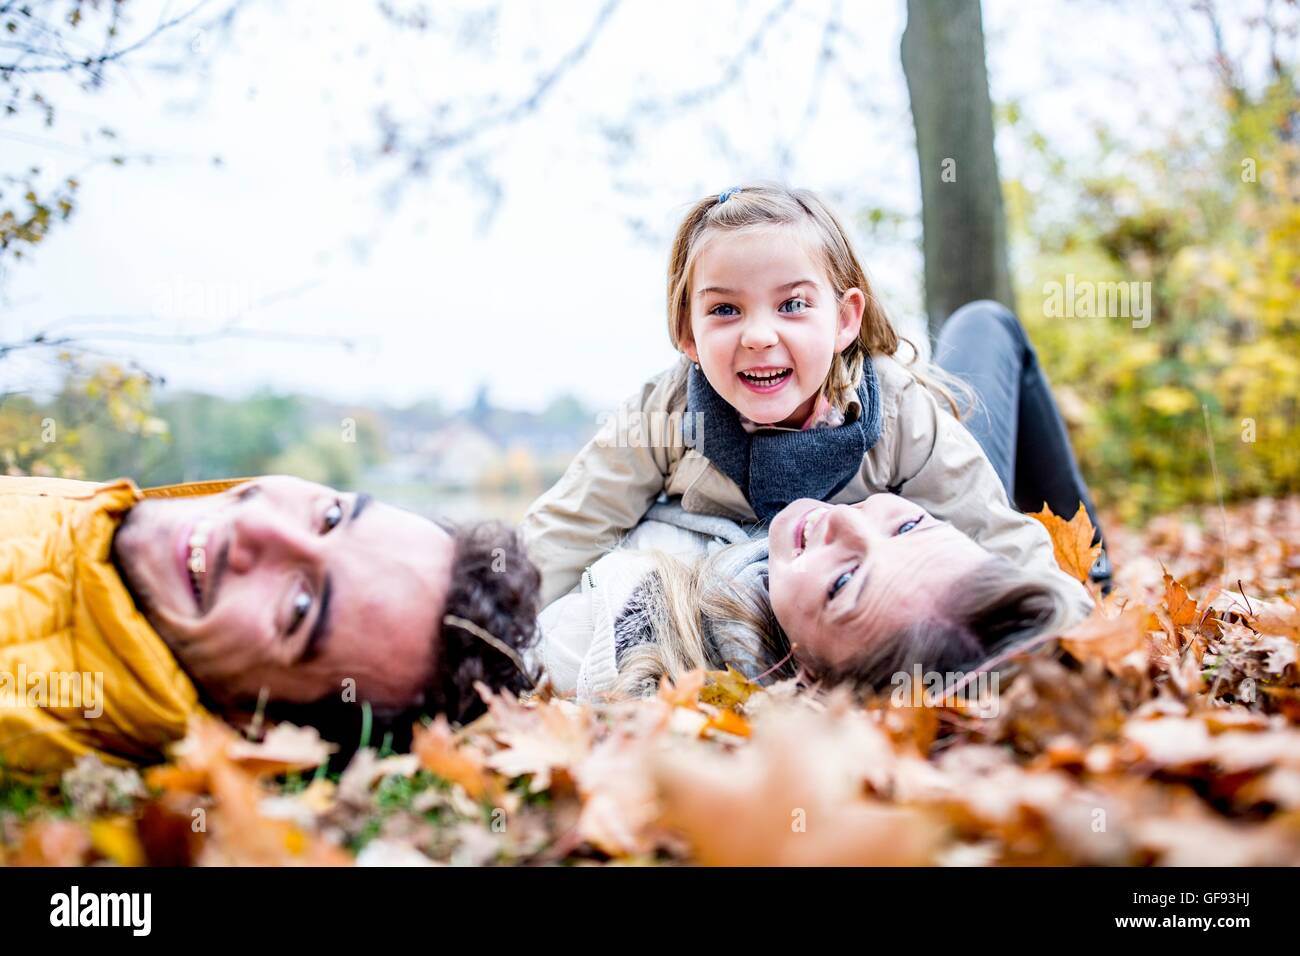 MODEL RELEASED. Family lying on dried leaves in autumn. Stock Photo